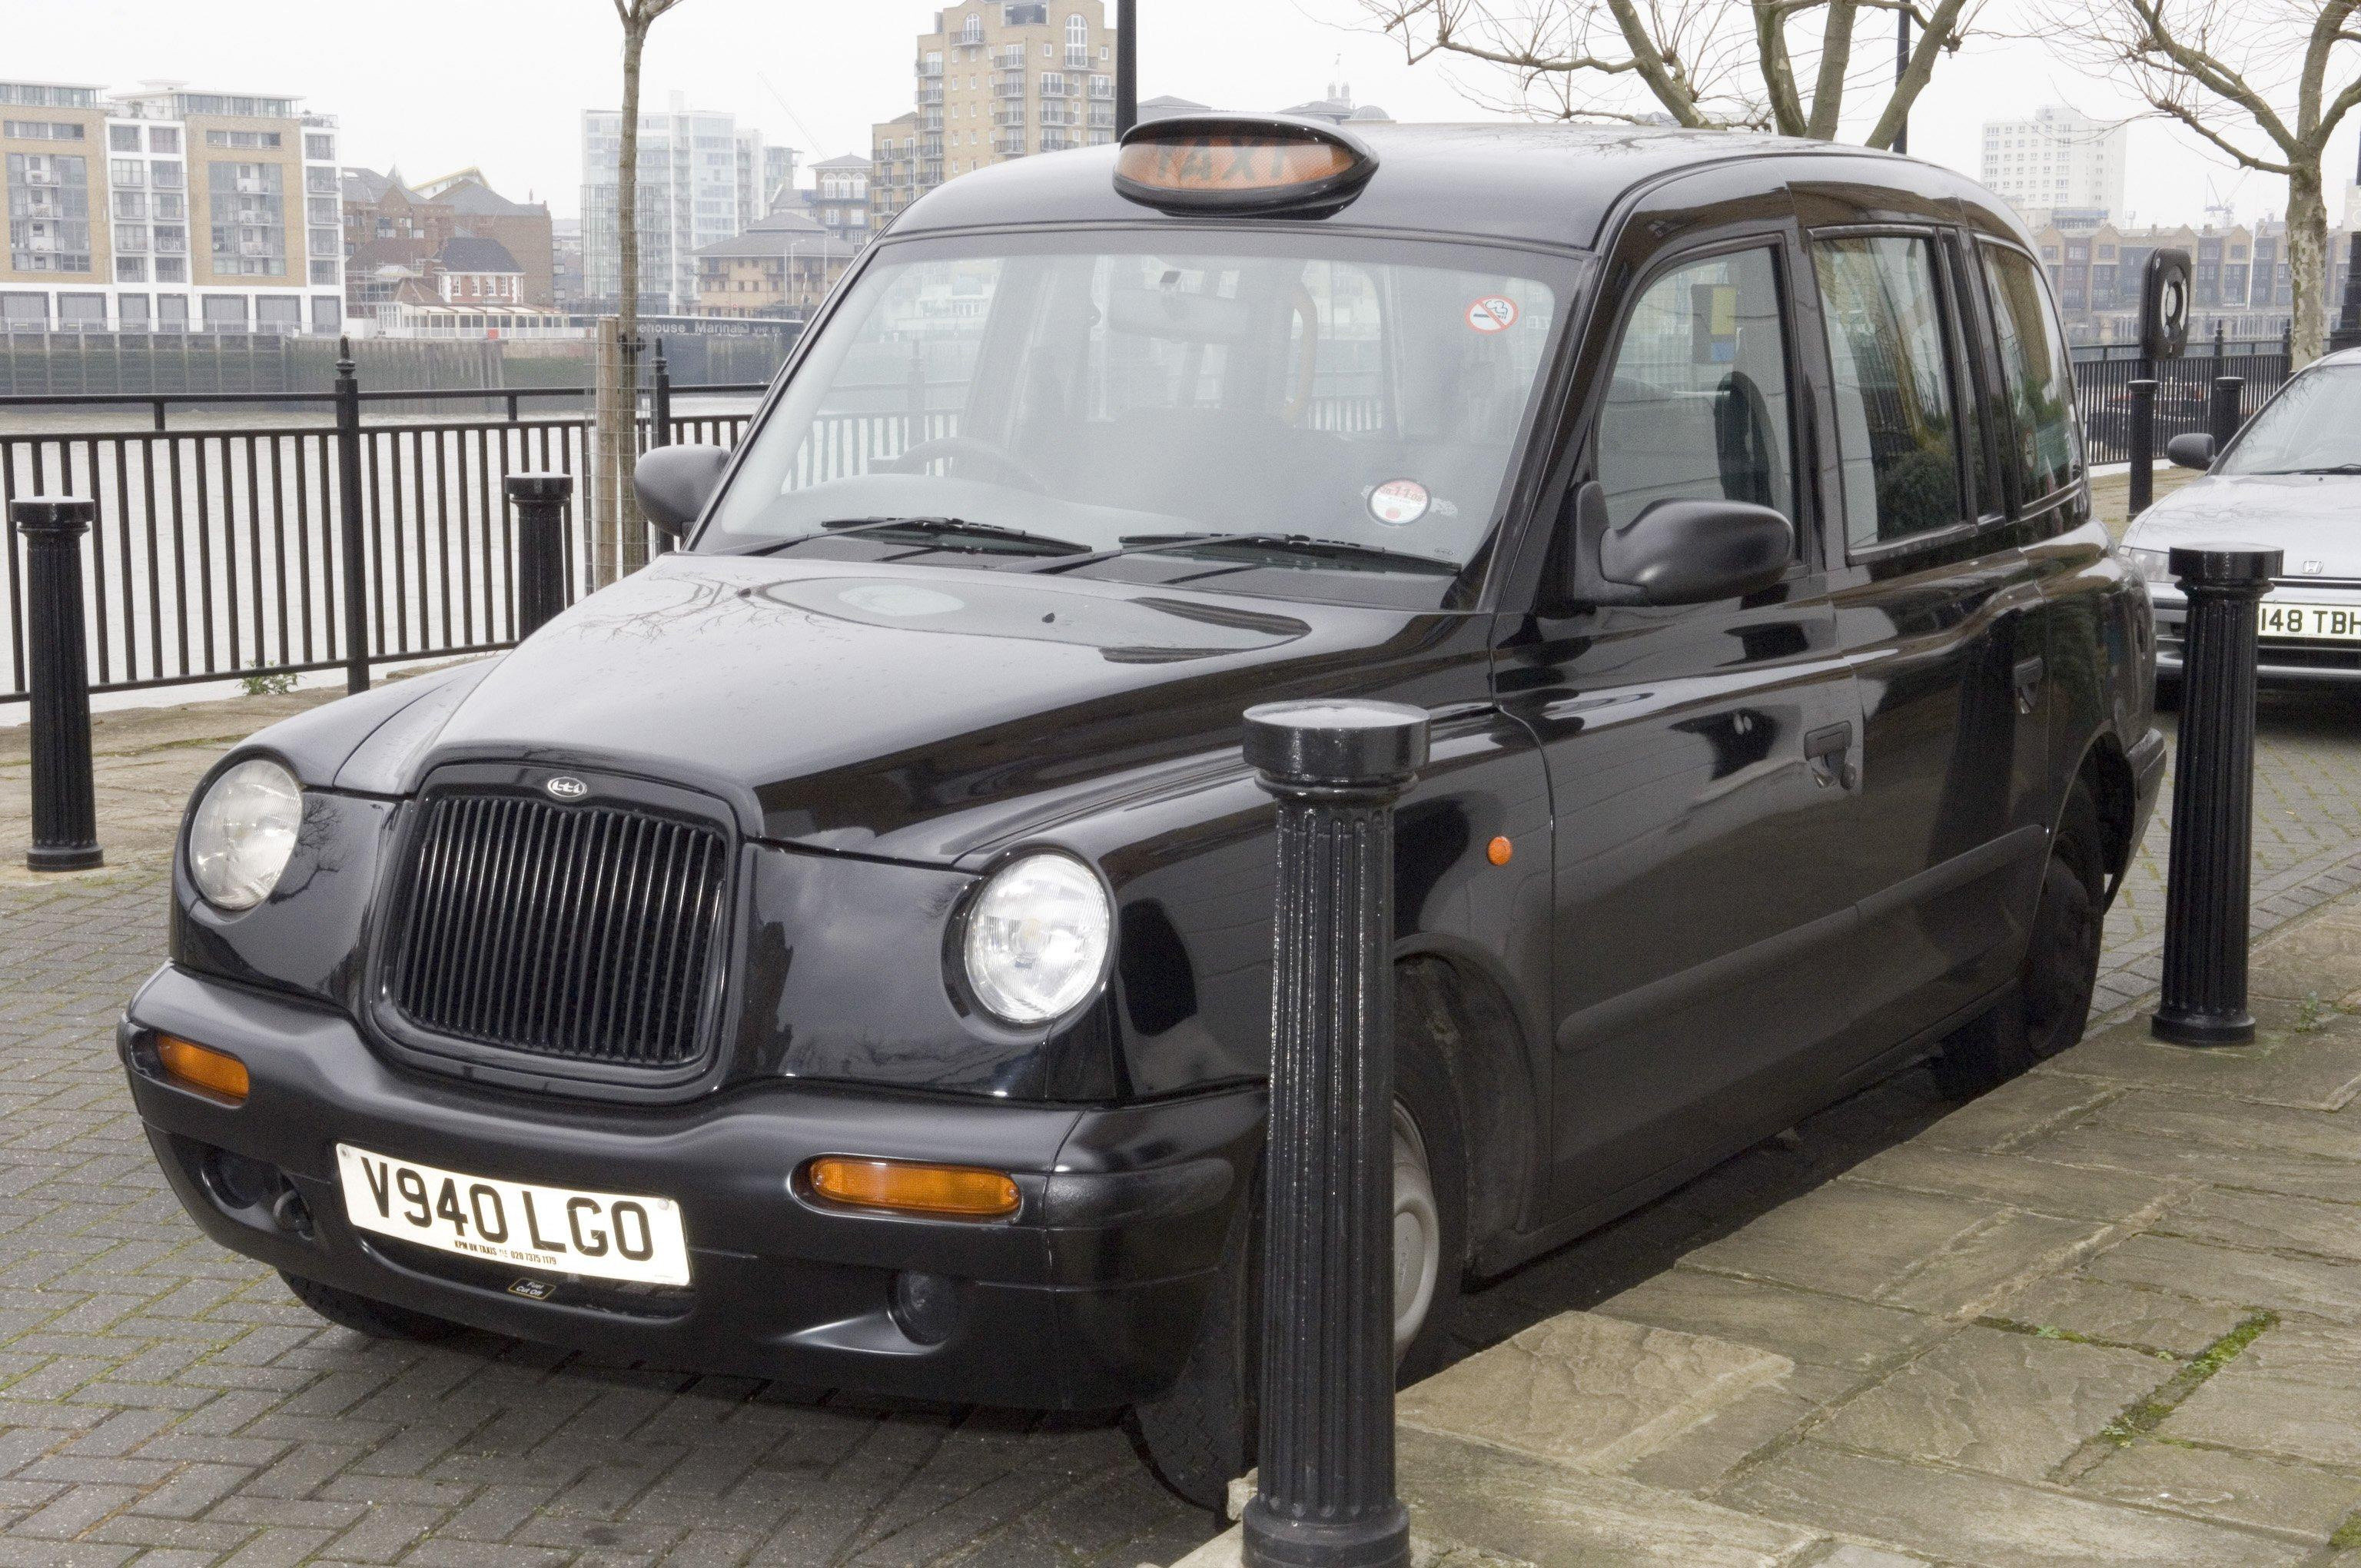 <strong>Worboys' drugged and attacked many of his victims in his black cab&nbsp;</strong>